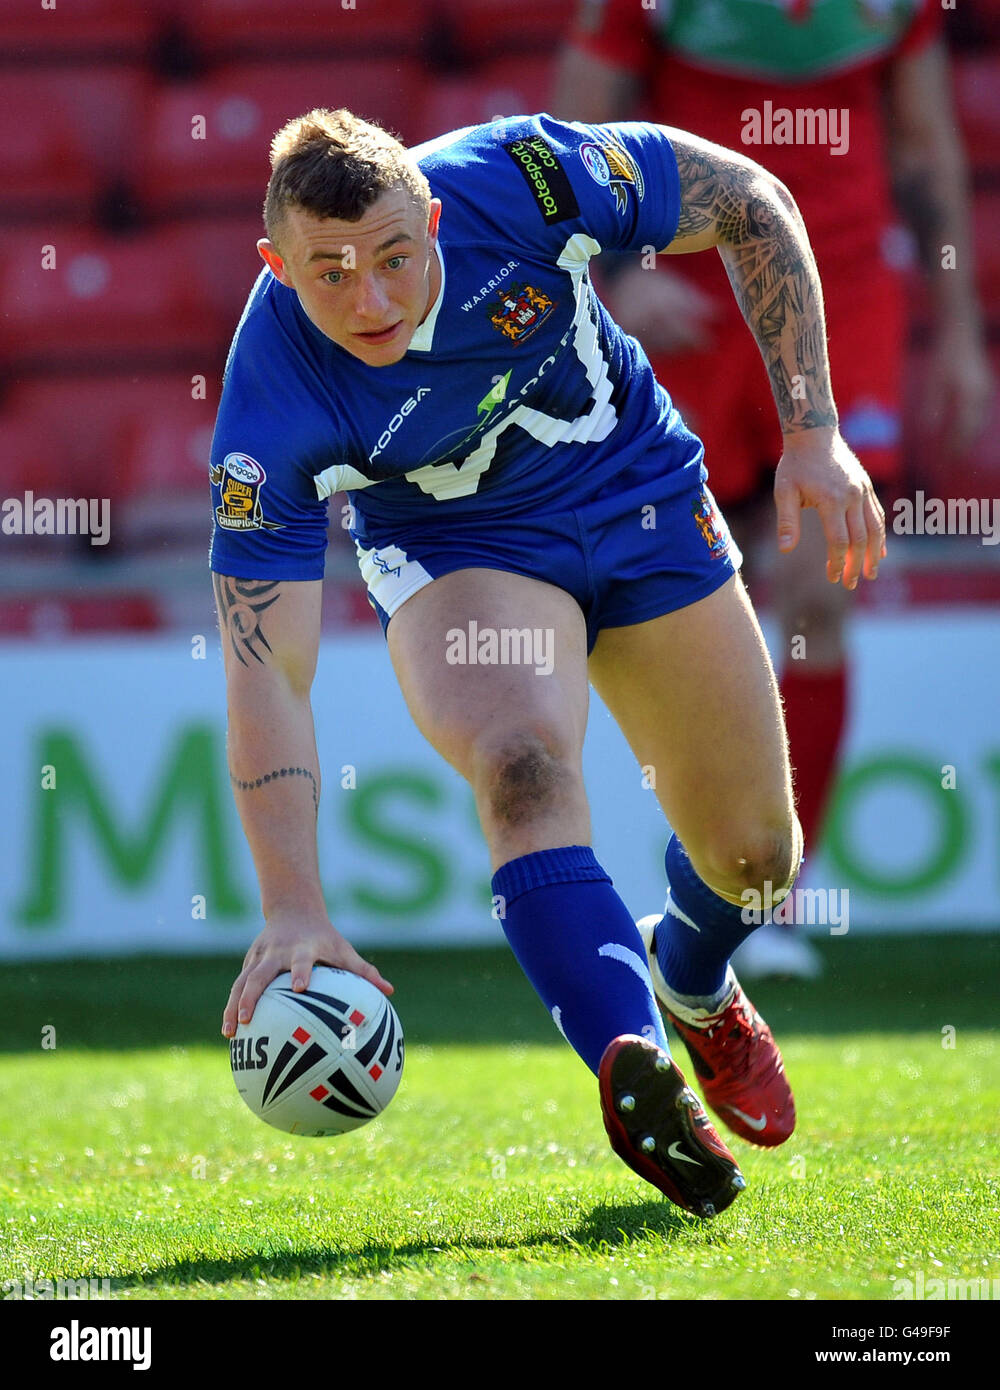 Rugby League - engage Super League - Celtic Crusaders v Wigan Warriors - The Racecourse Ground. Wigan Warriors' Josh Charnley sores a try Stock Photo